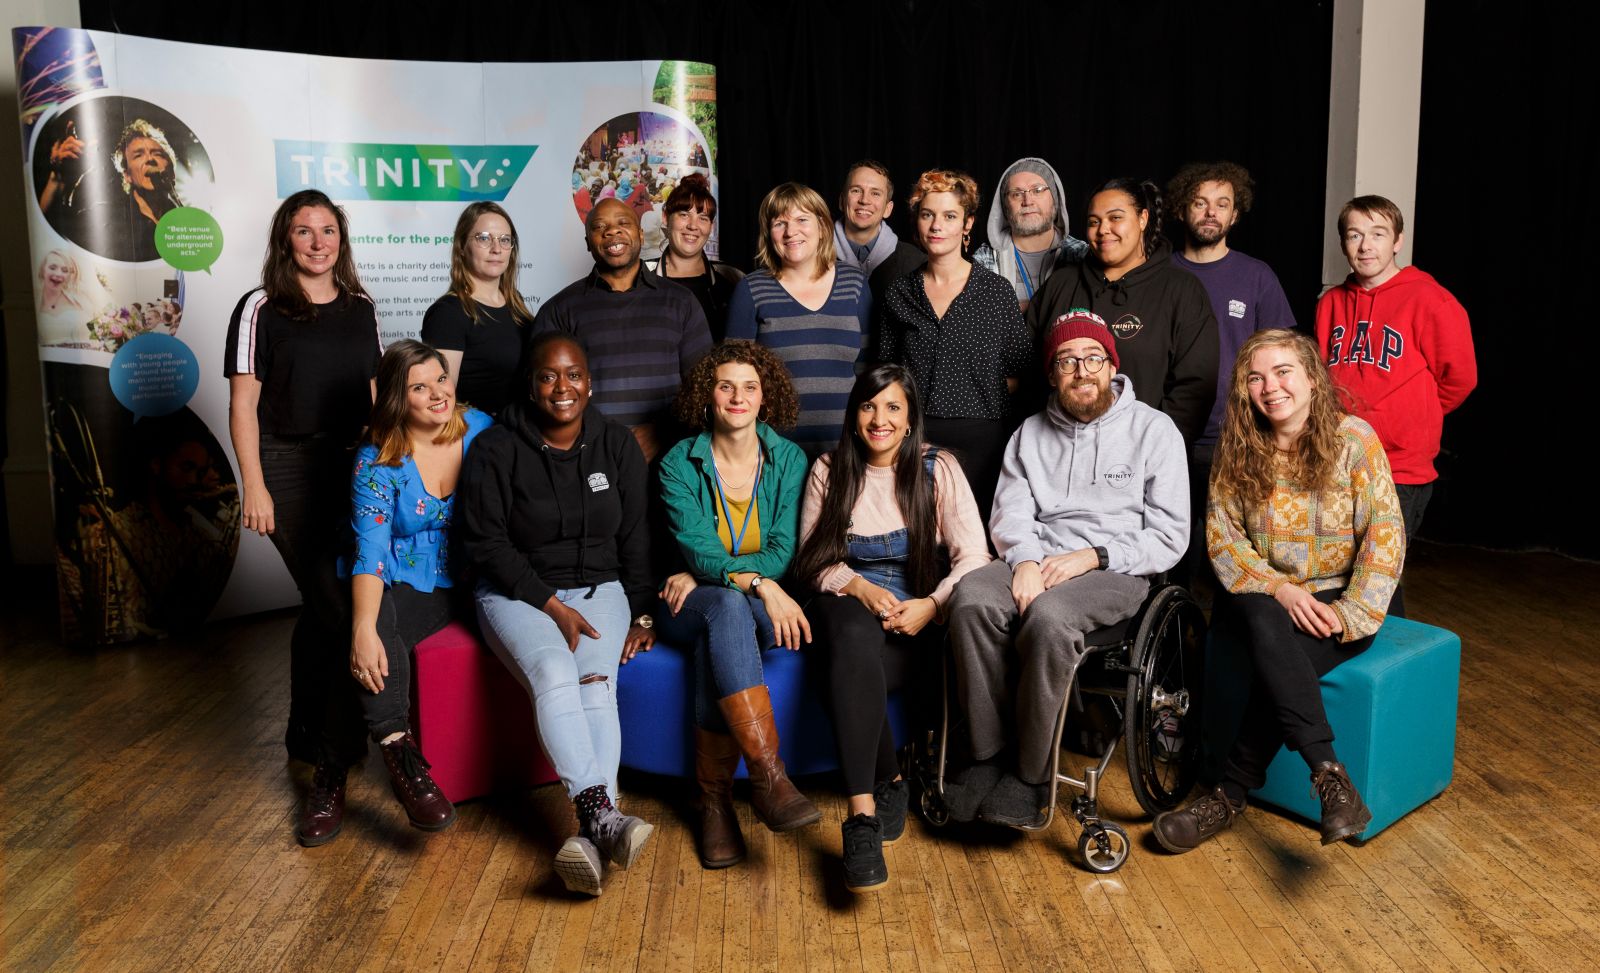 The Trinity Centre is run by a dedicated team of full-time staff and volunteers.